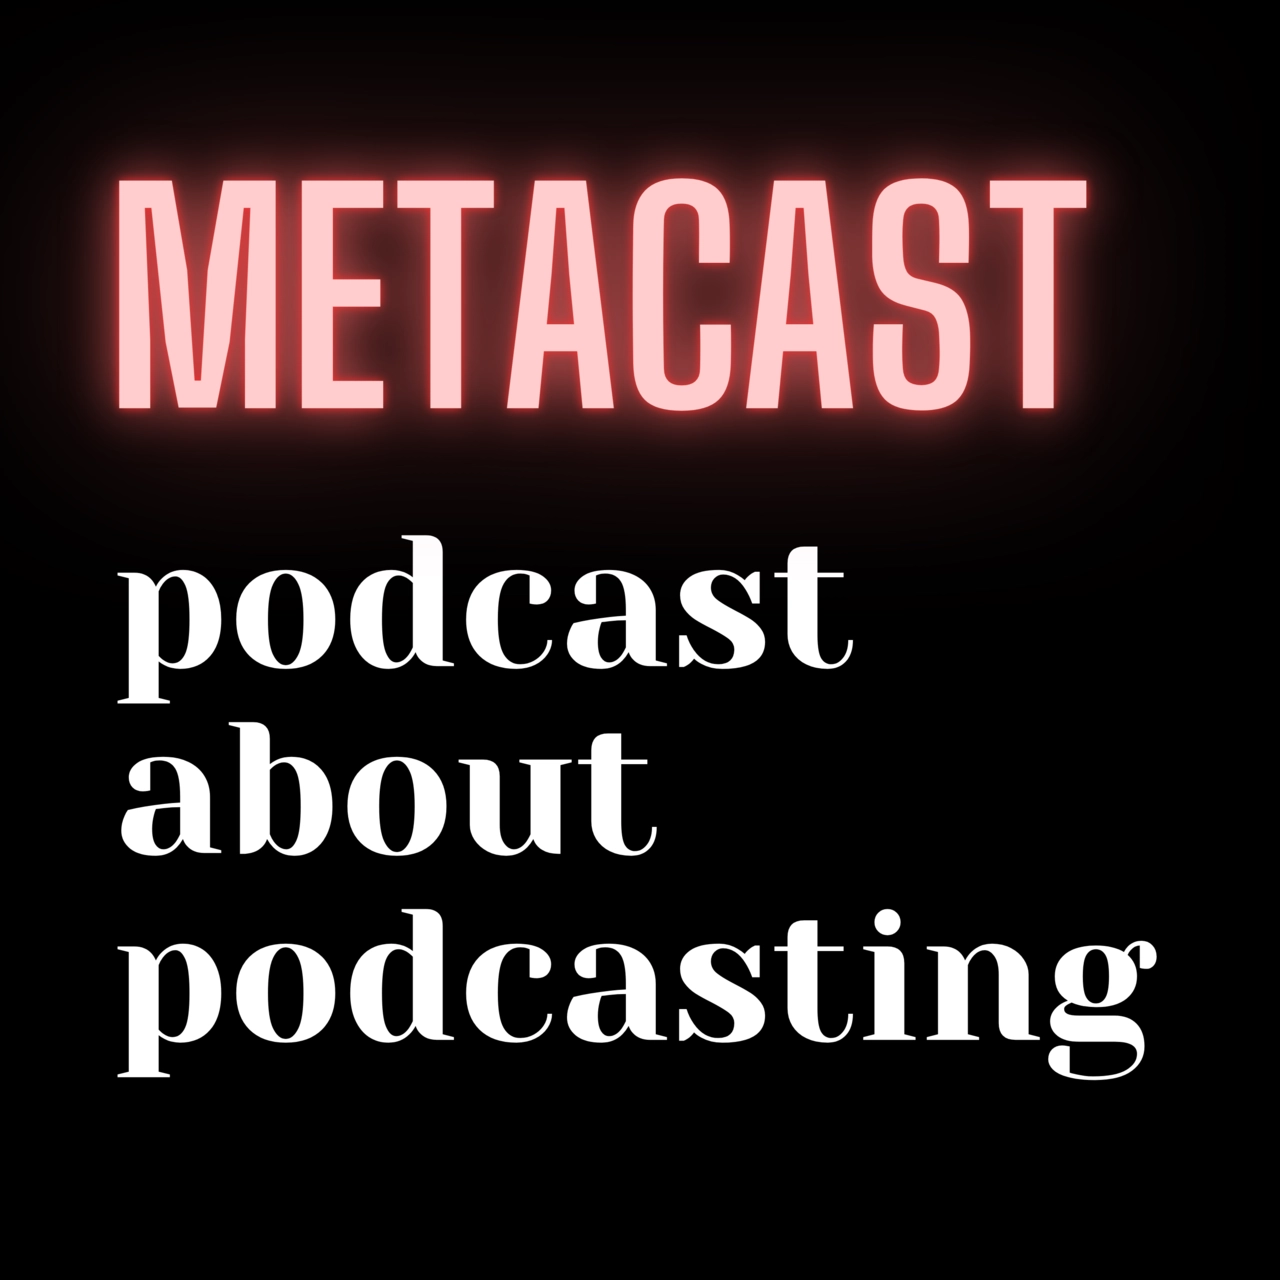 Metacast - Podcast about podcasting